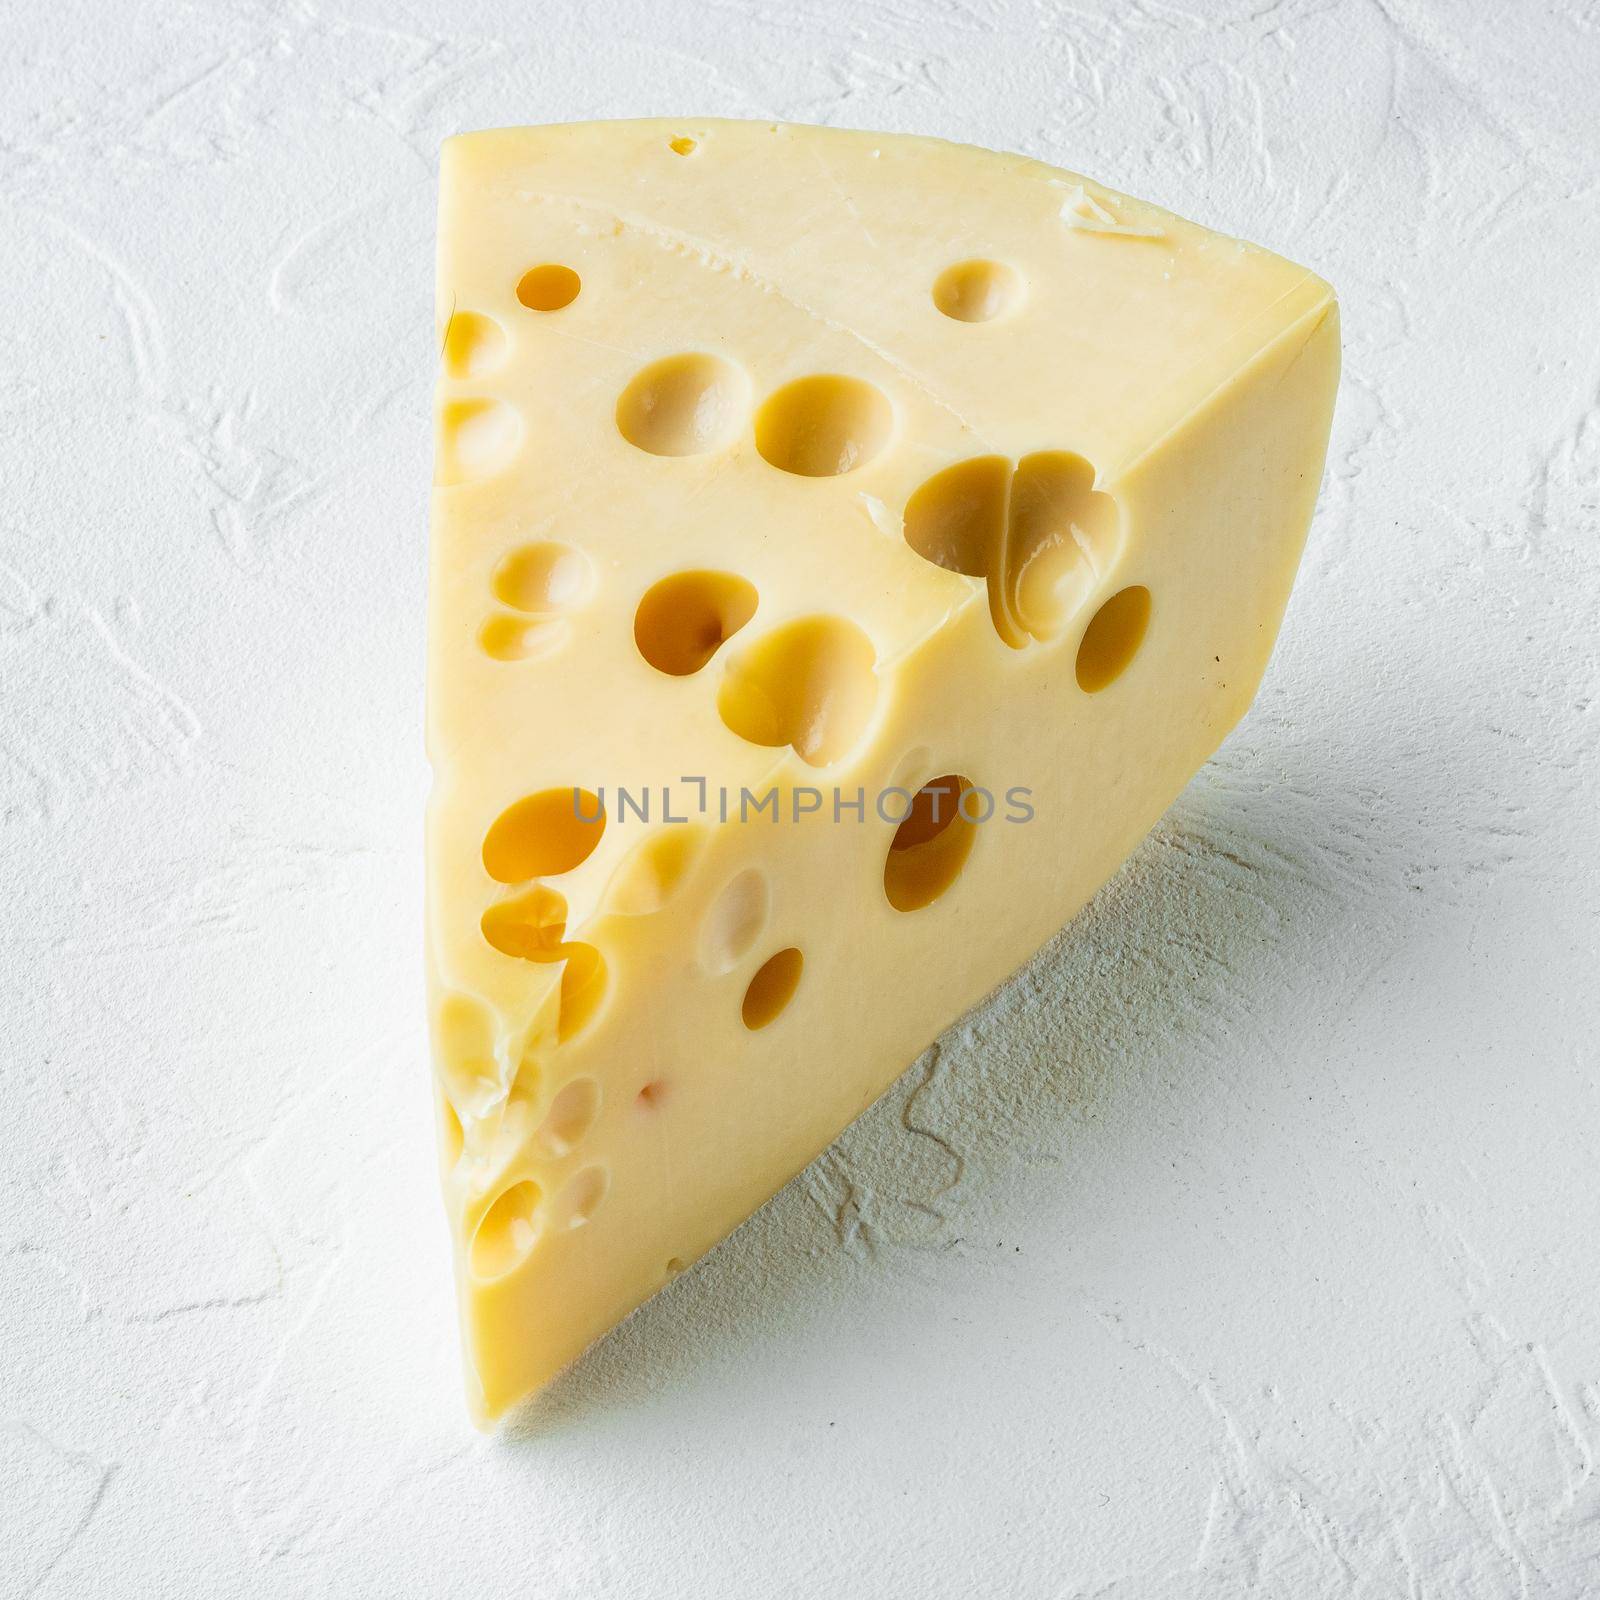 Maasdam cheese set, on white stone surface, square format